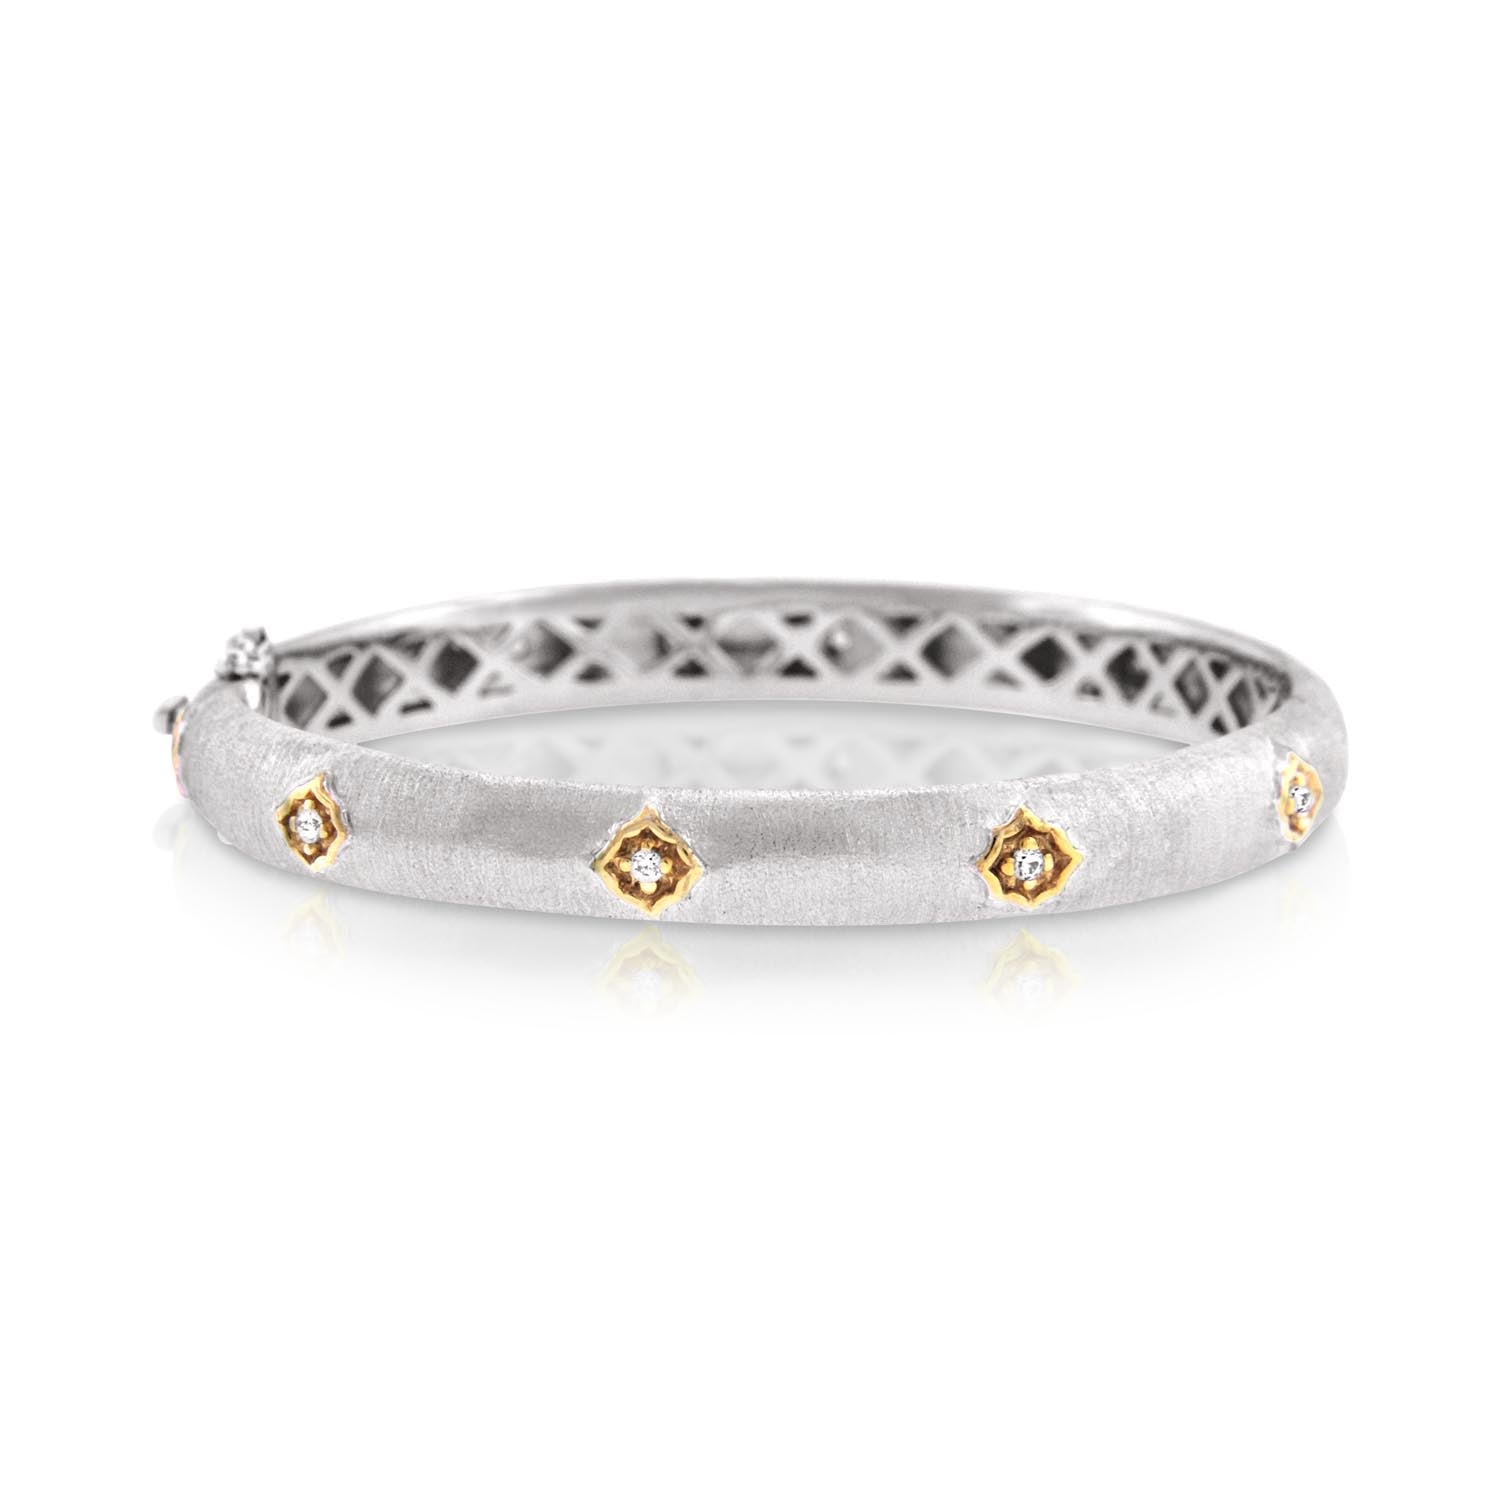 Silver Thin 2-Tone Frosted Bracelet